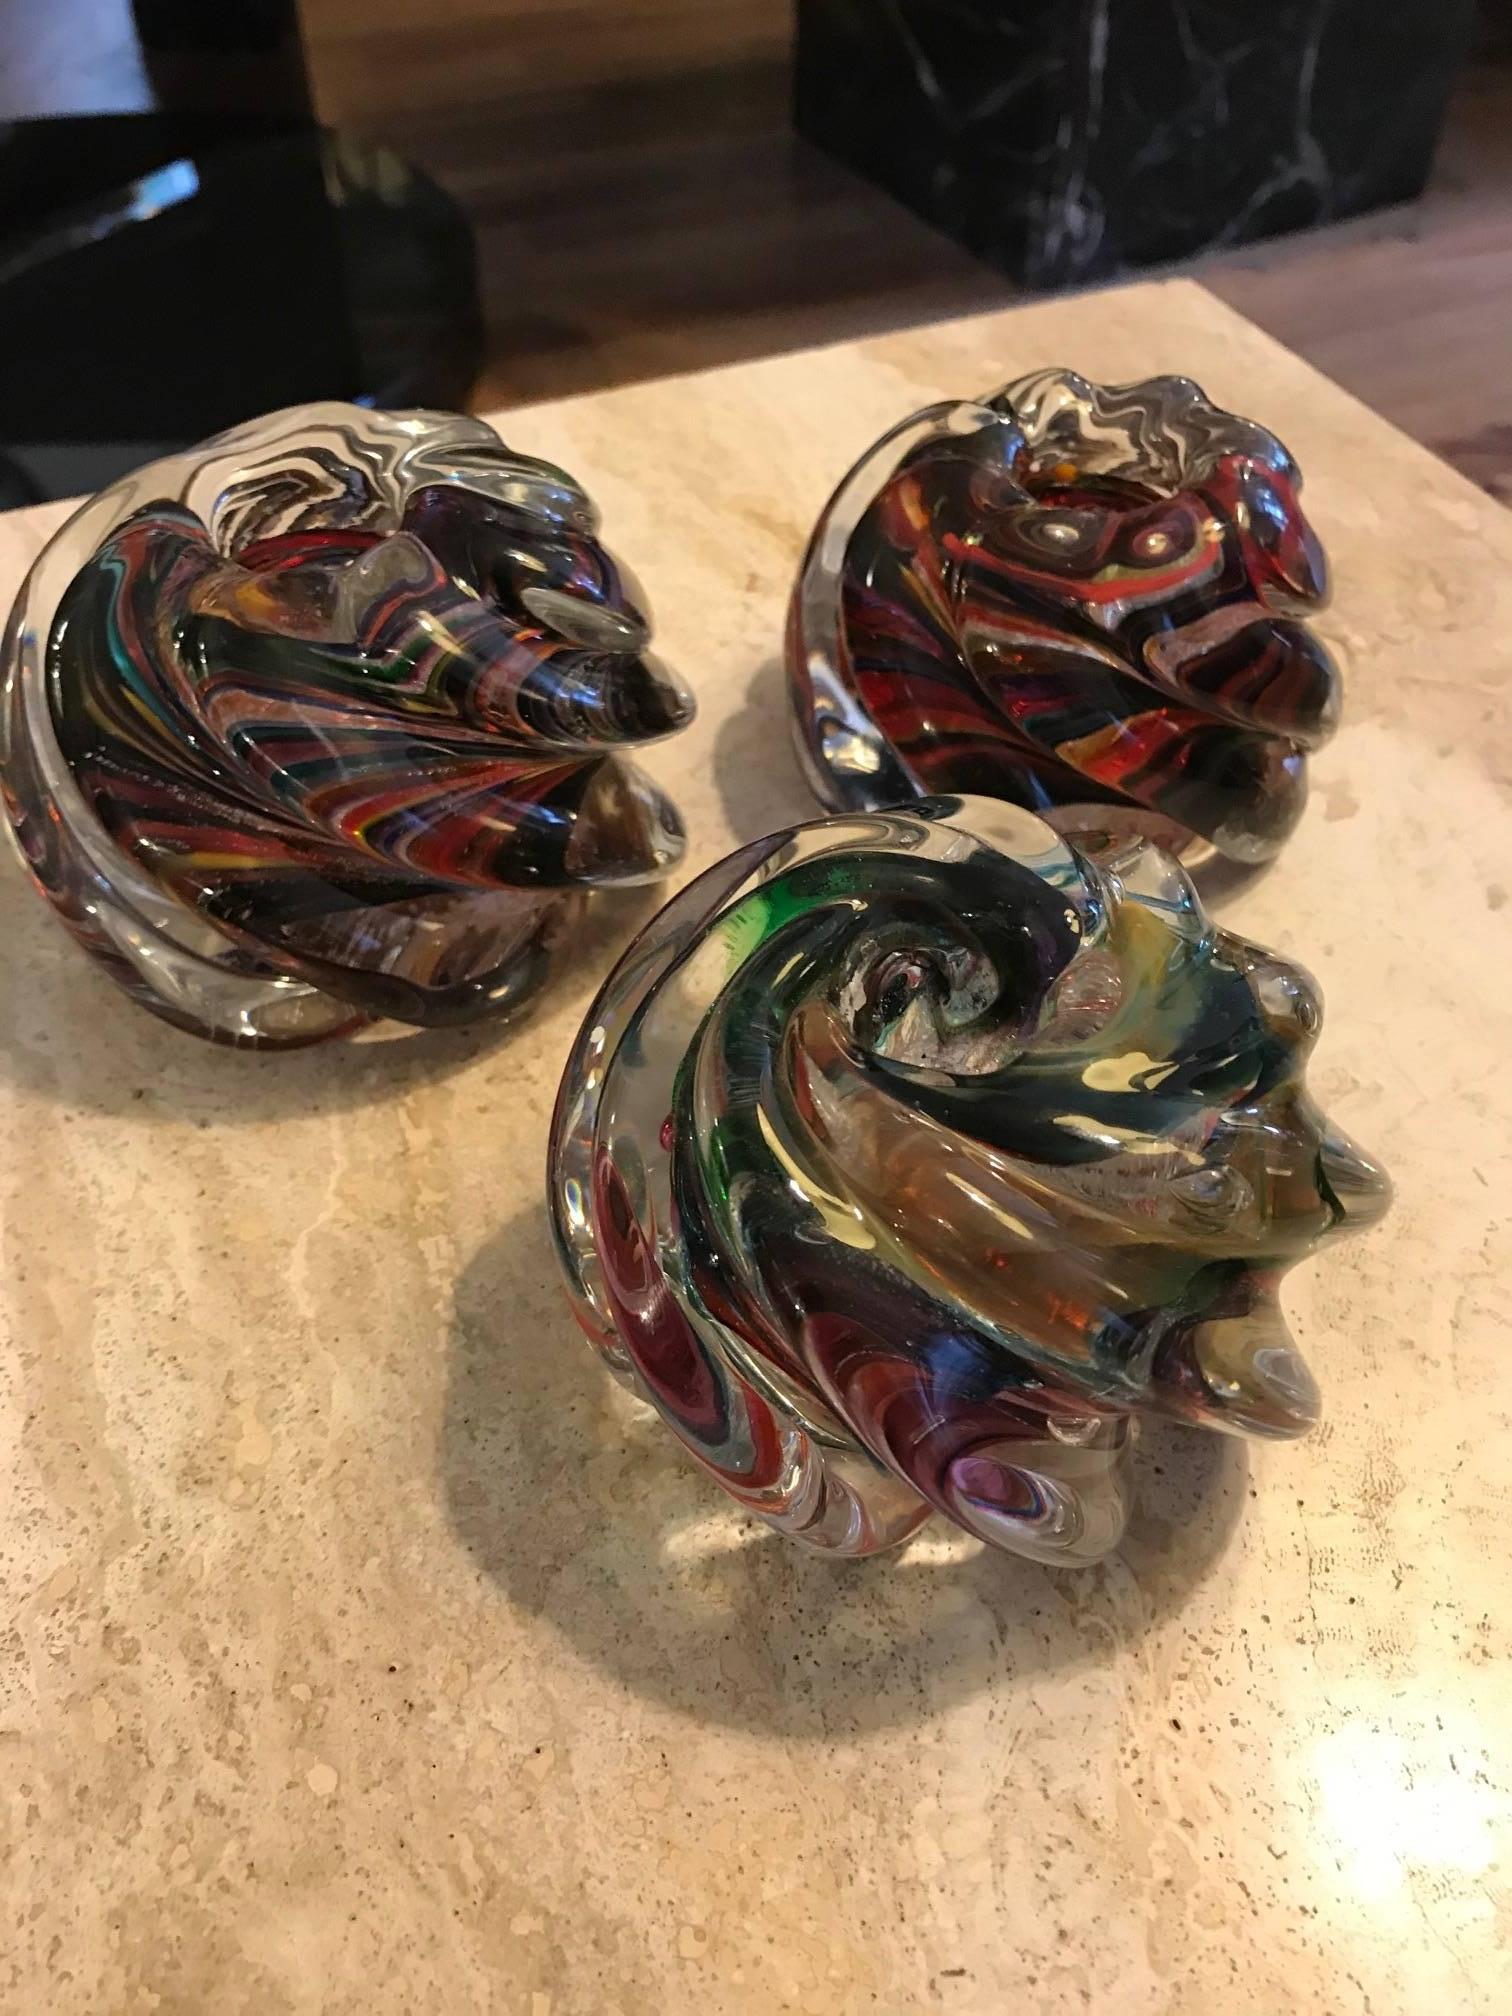 Three Murano glass votives. These candle holders have deep swirls and have colored glass inclusions.
They are signed however the signature is not legible. Fine decorative tabletop objects.
Each votive is a slightly different size.